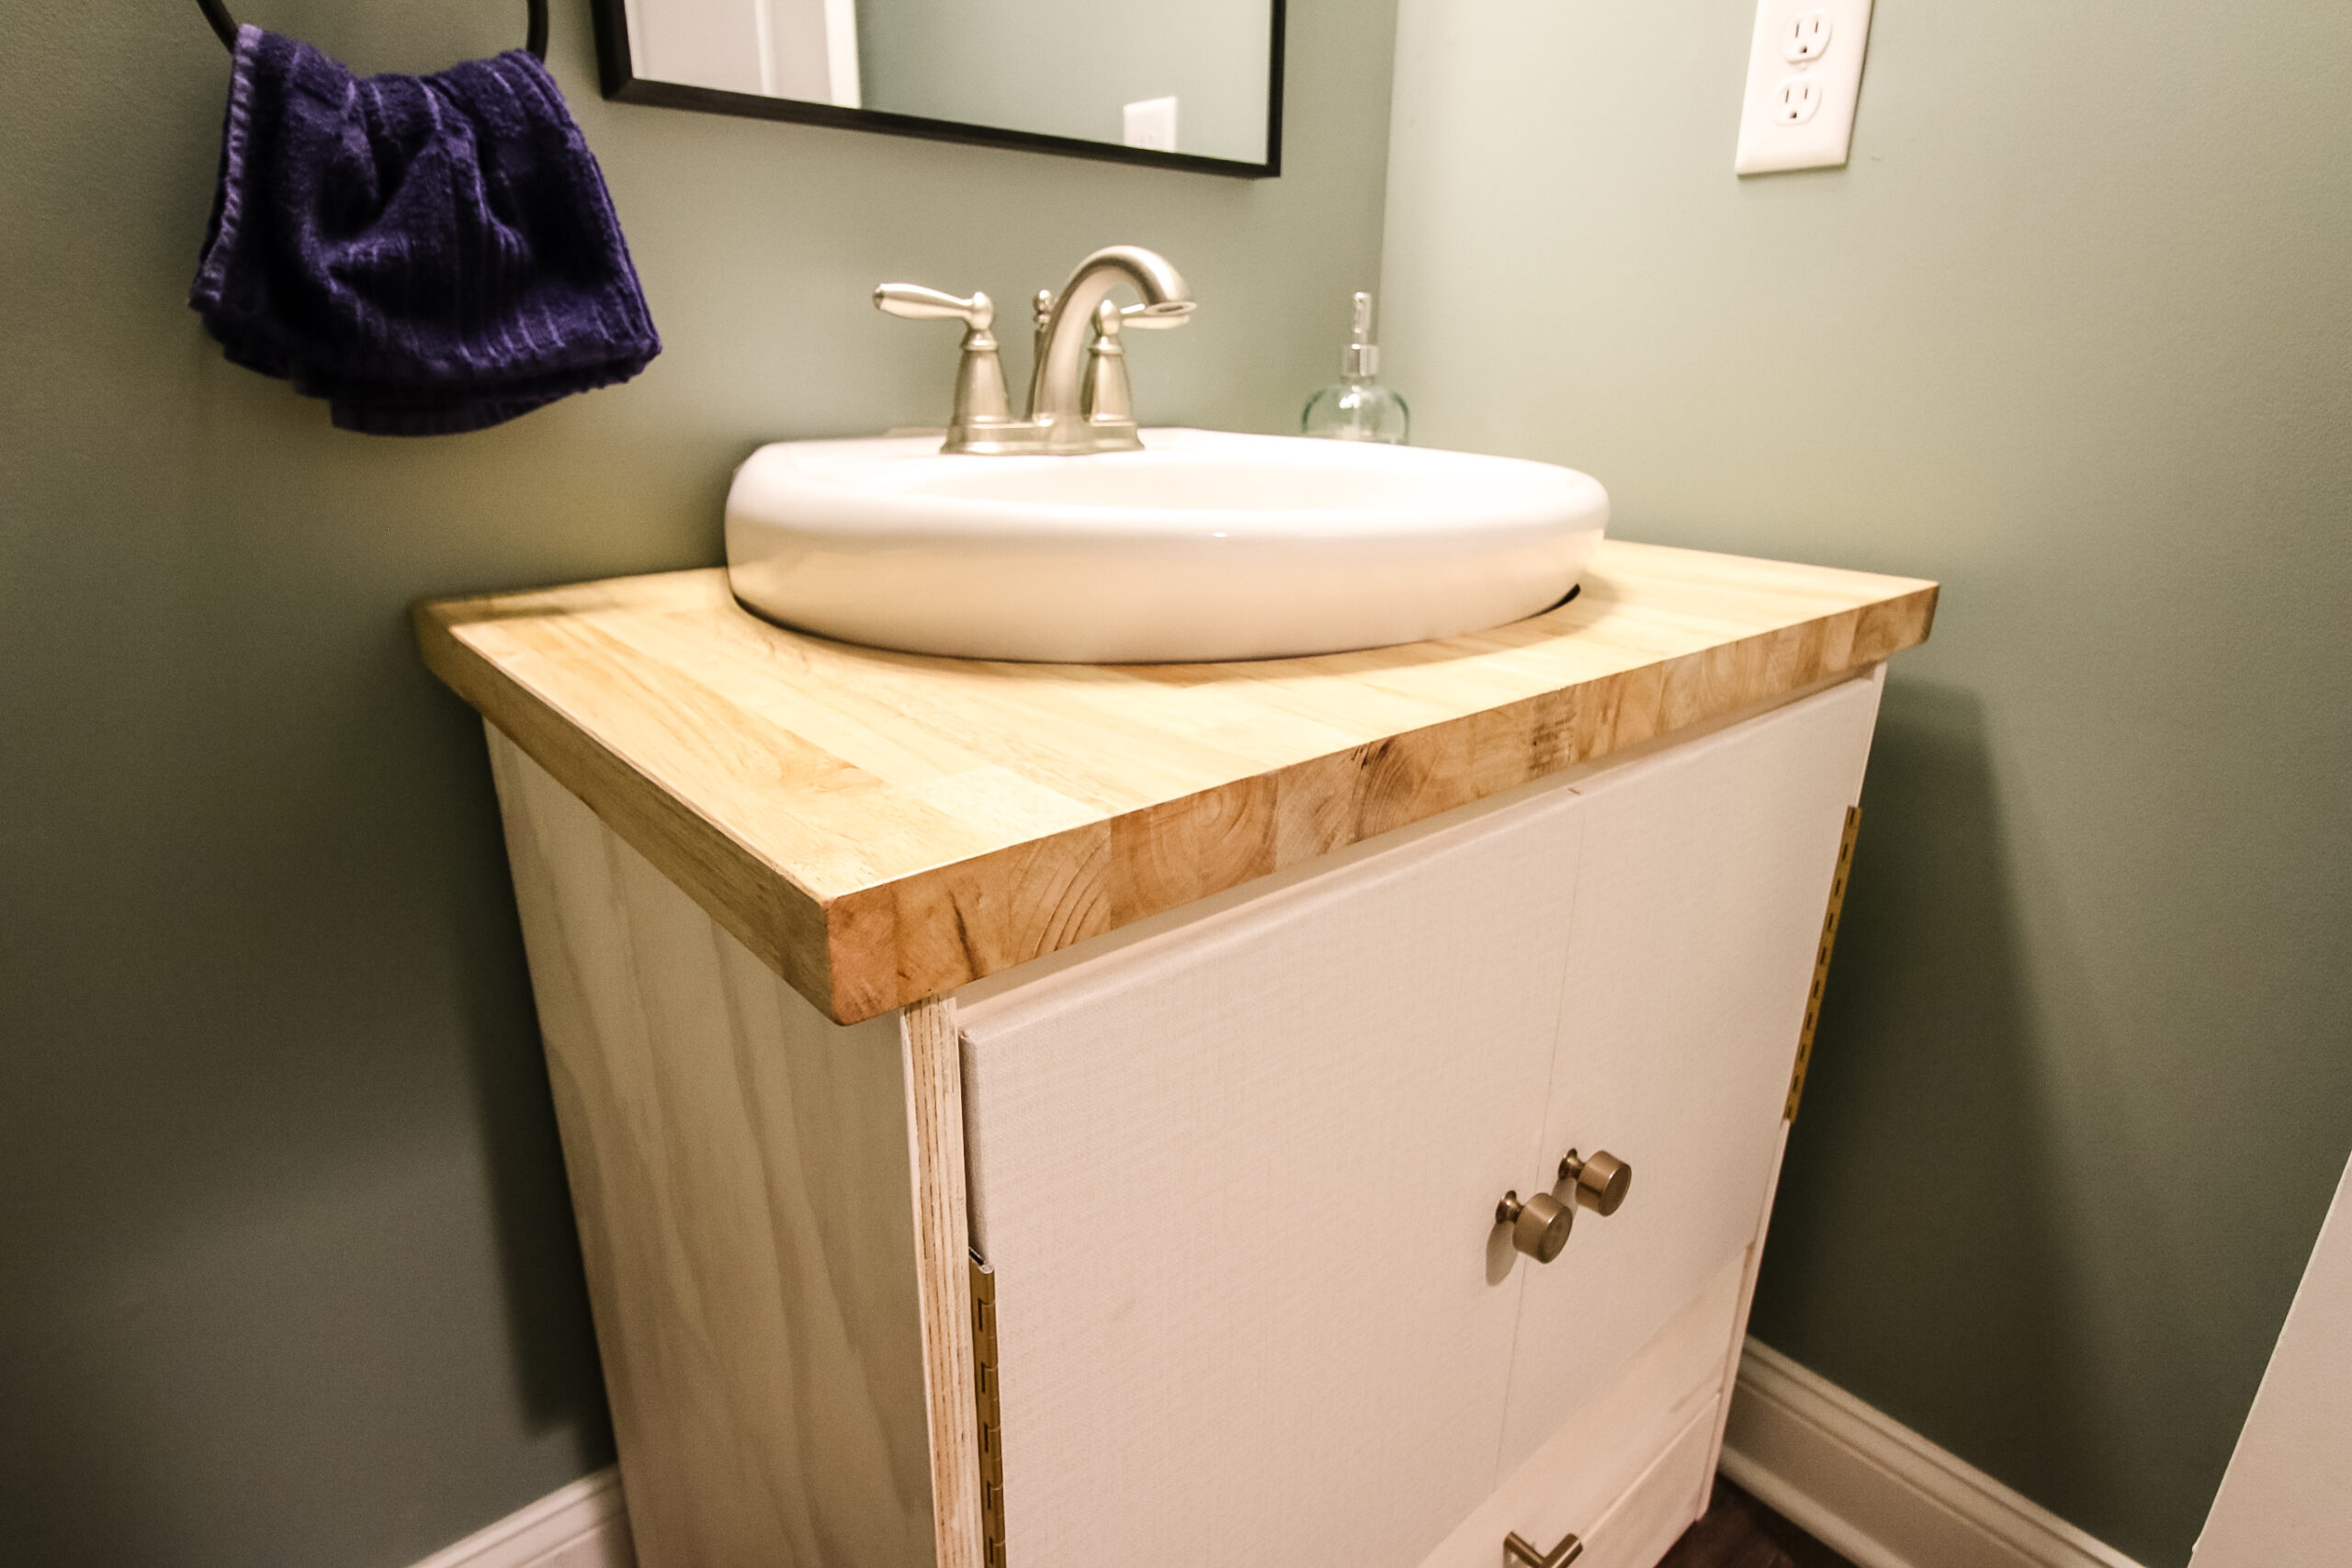 How To Build A Vanity For Pedestal Sink, Can You Put A Vanity Around Pedestal Sink